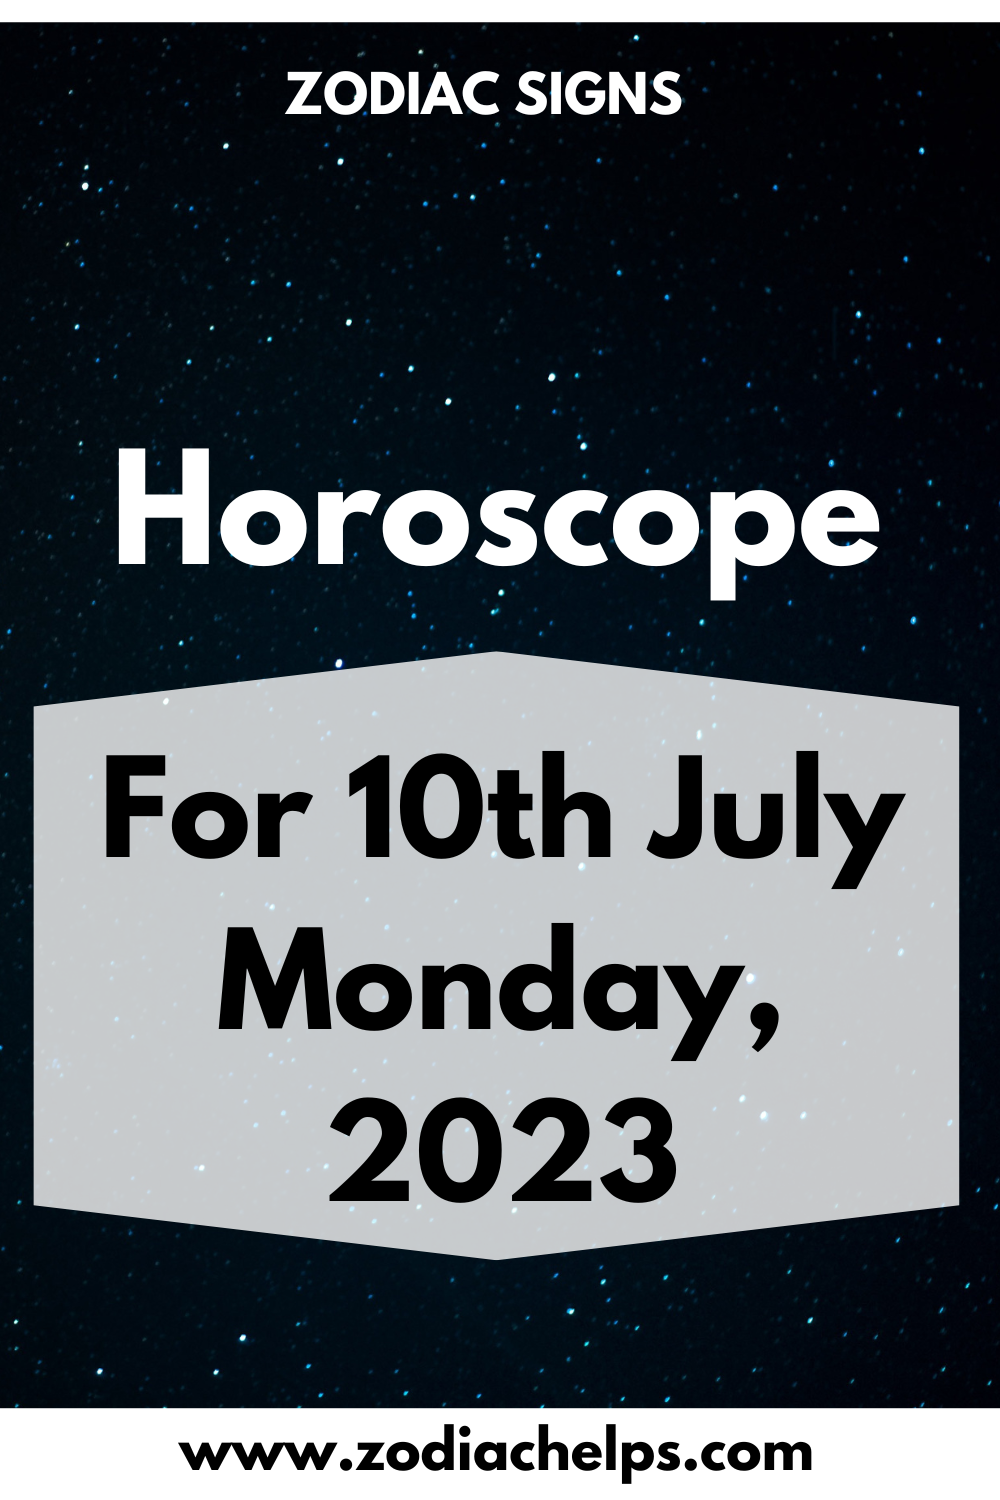 Horoscope for 10th July Monday, 2023